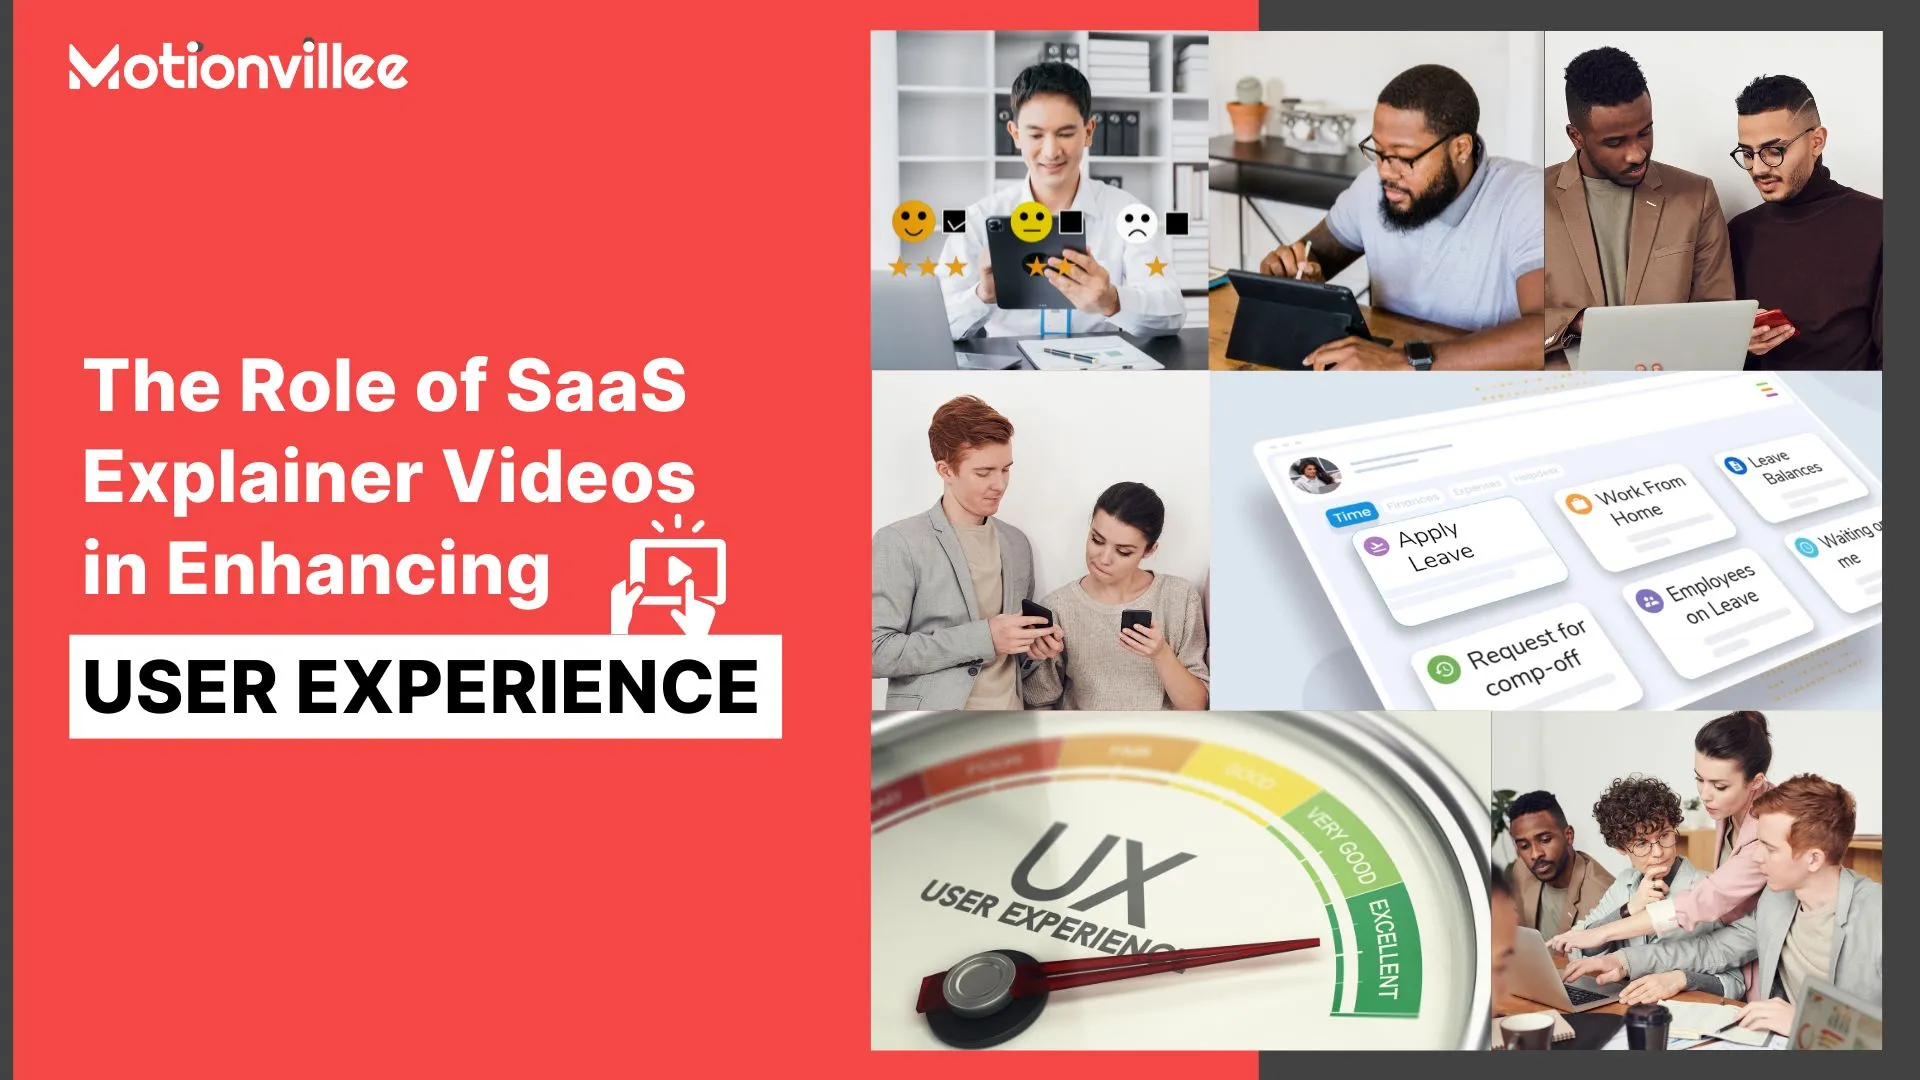 The Role of SaaS Explainer Video in Enhancing User Experience